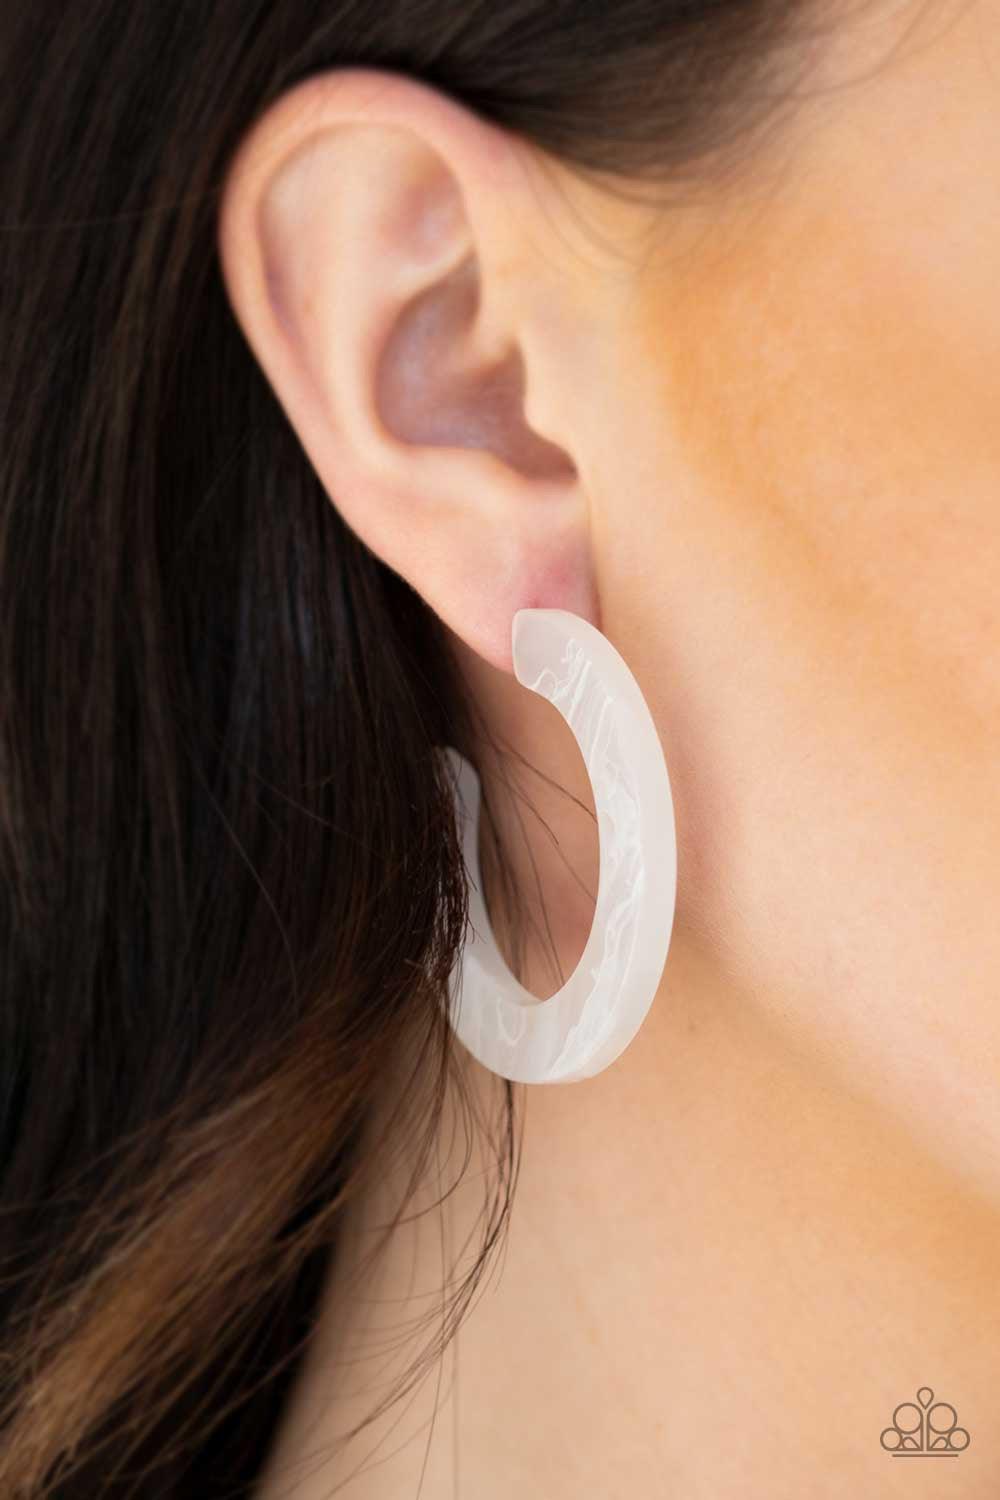 Paparazzi Accessories Oceanside Oasis - White Featuring a smoky white finish, an opaque hoop curls around the ear for a colorfully retro look. Earring attaches to a standard post fitting. Hoop measures 1 3/4" in diameter.